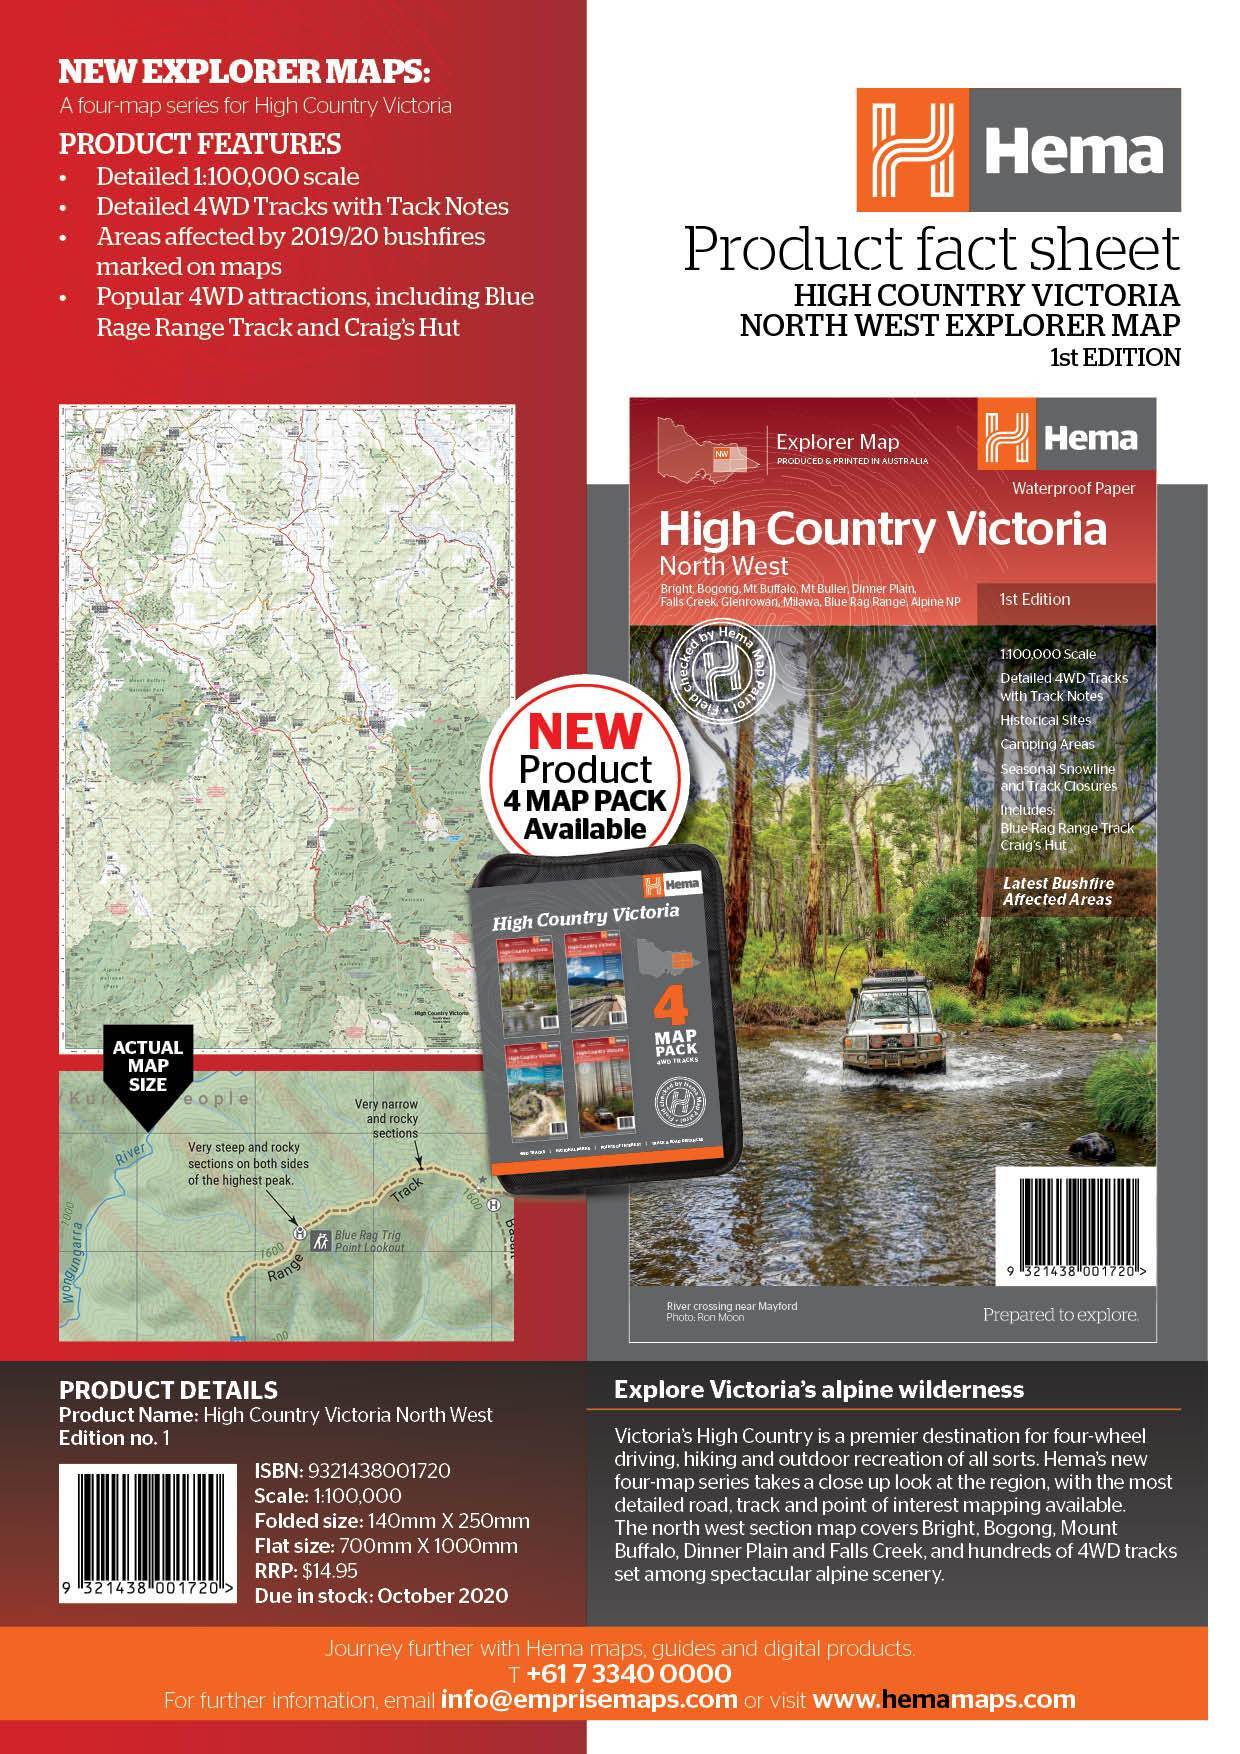 Hema The Victorian High Country - North Western Map 1st Edition | Hema